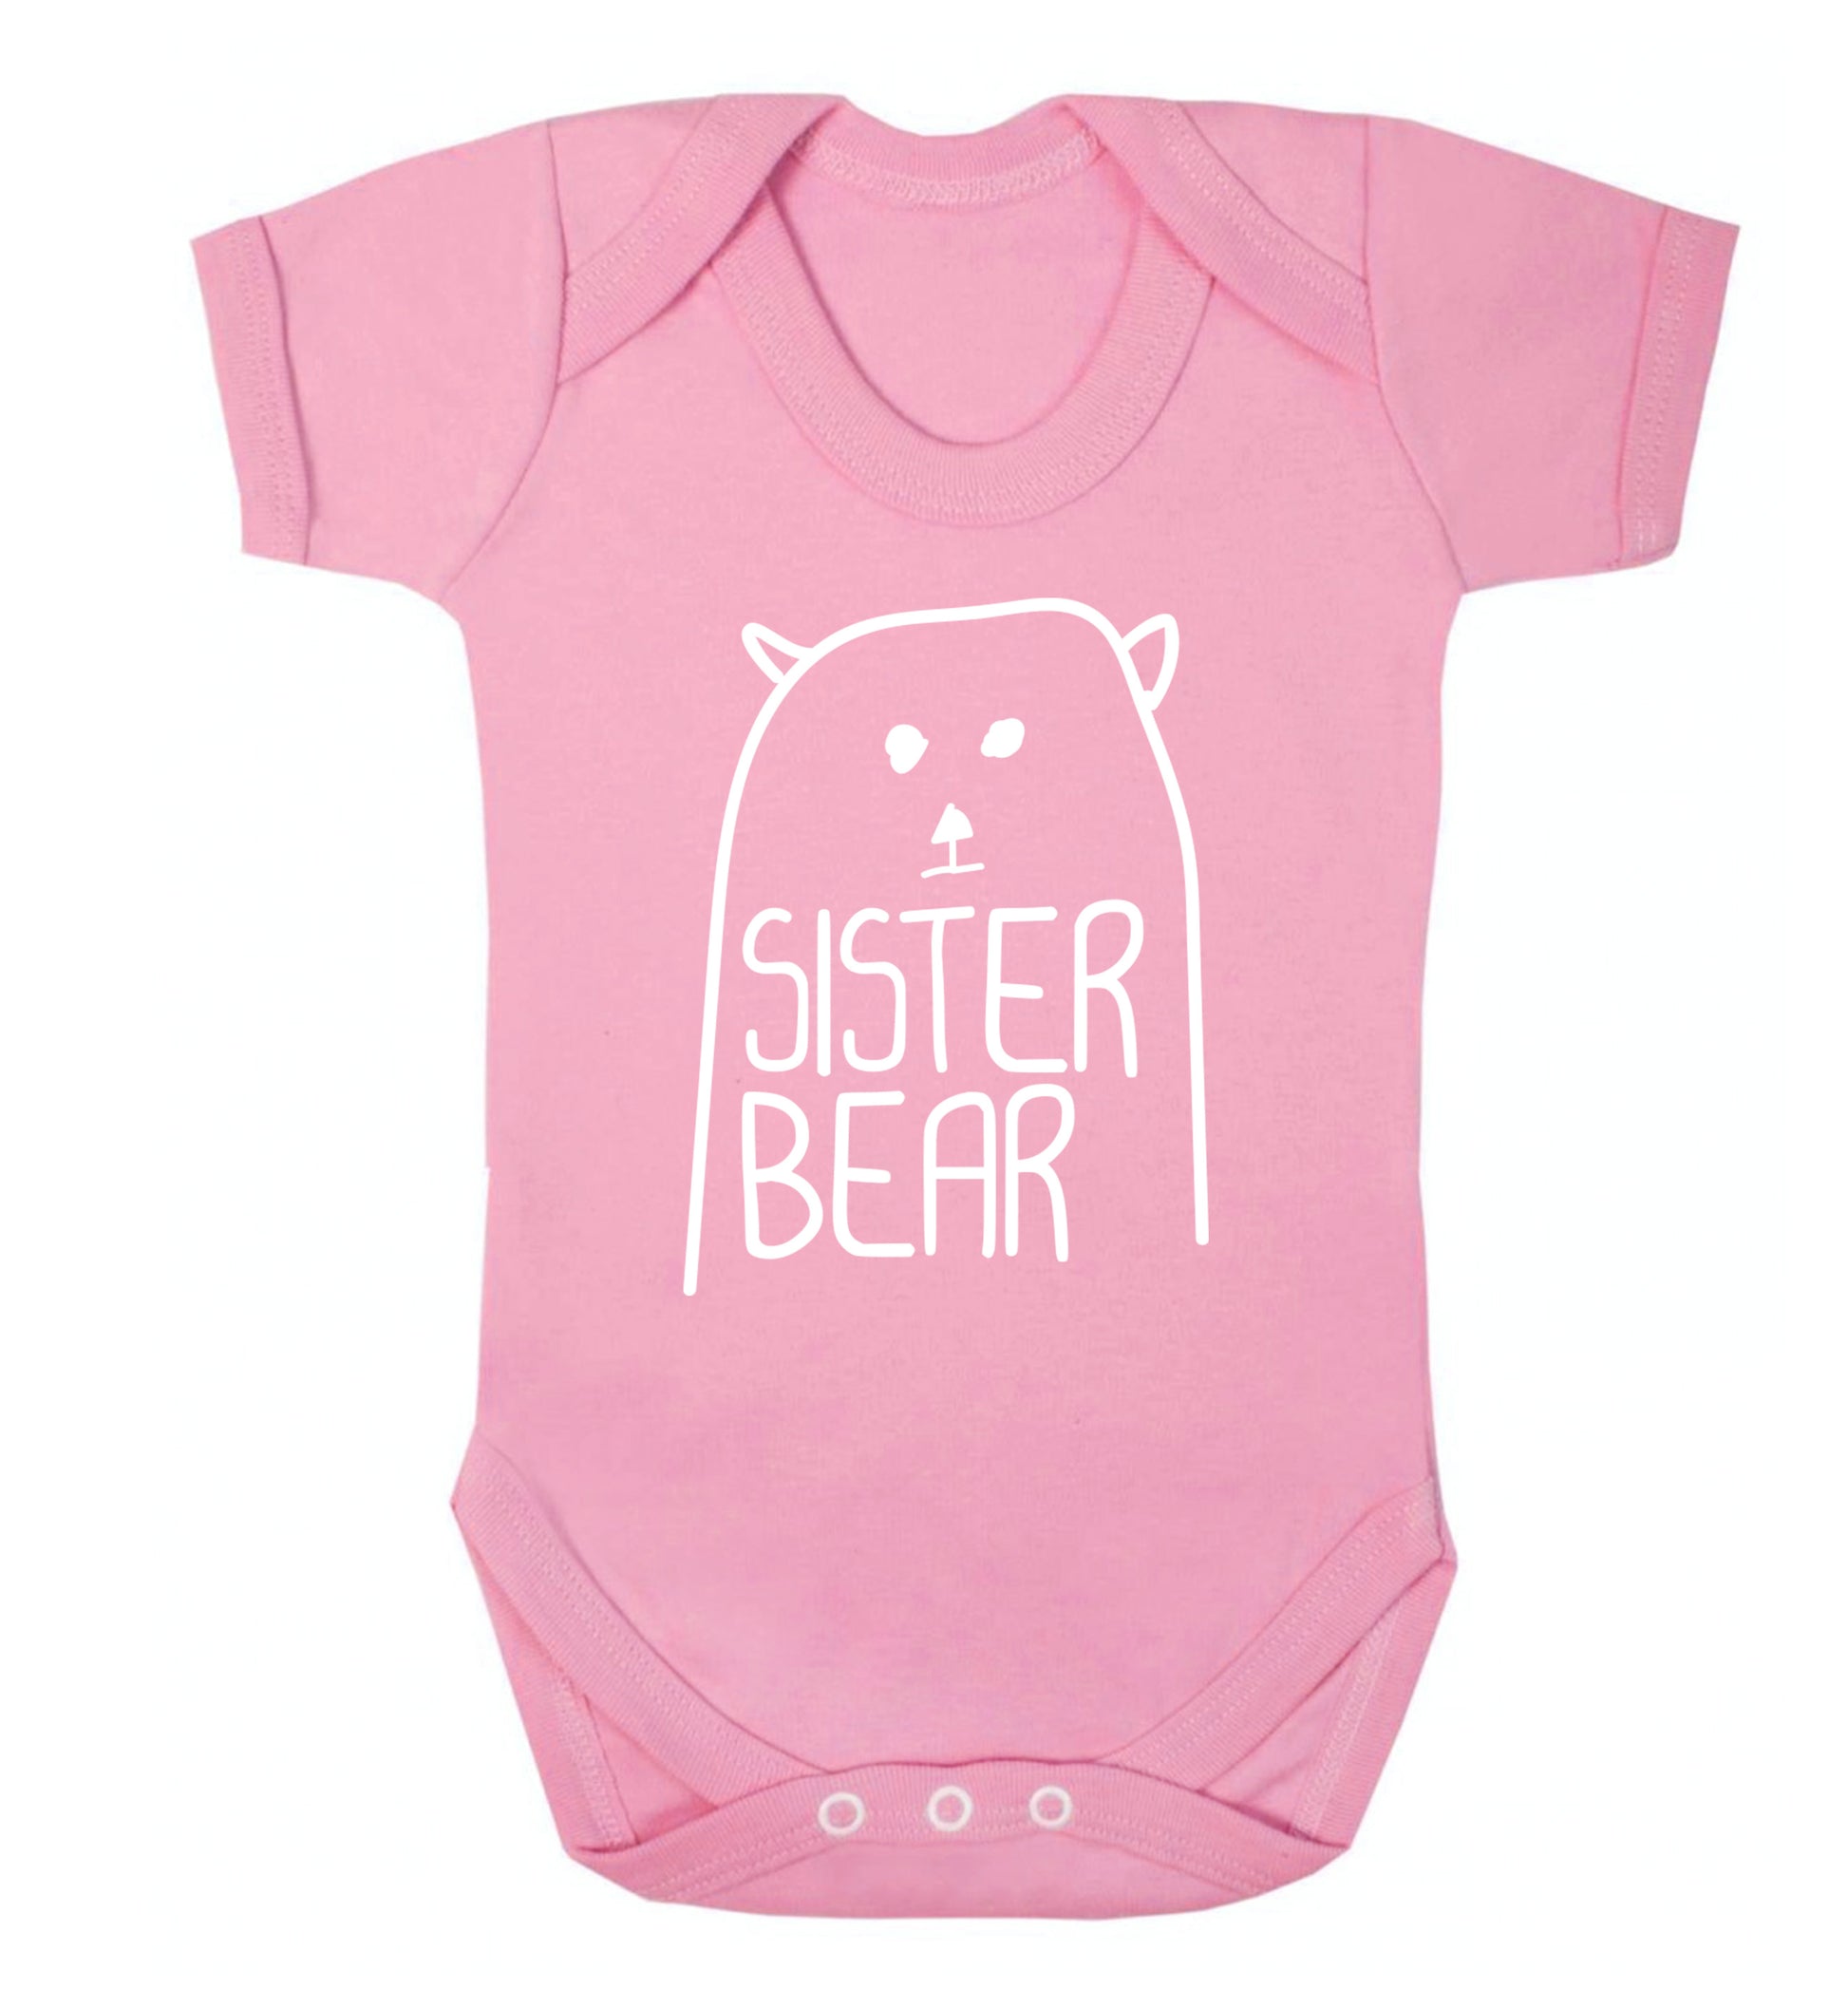 Sister bear Baby Vest pale pink 18-24 months